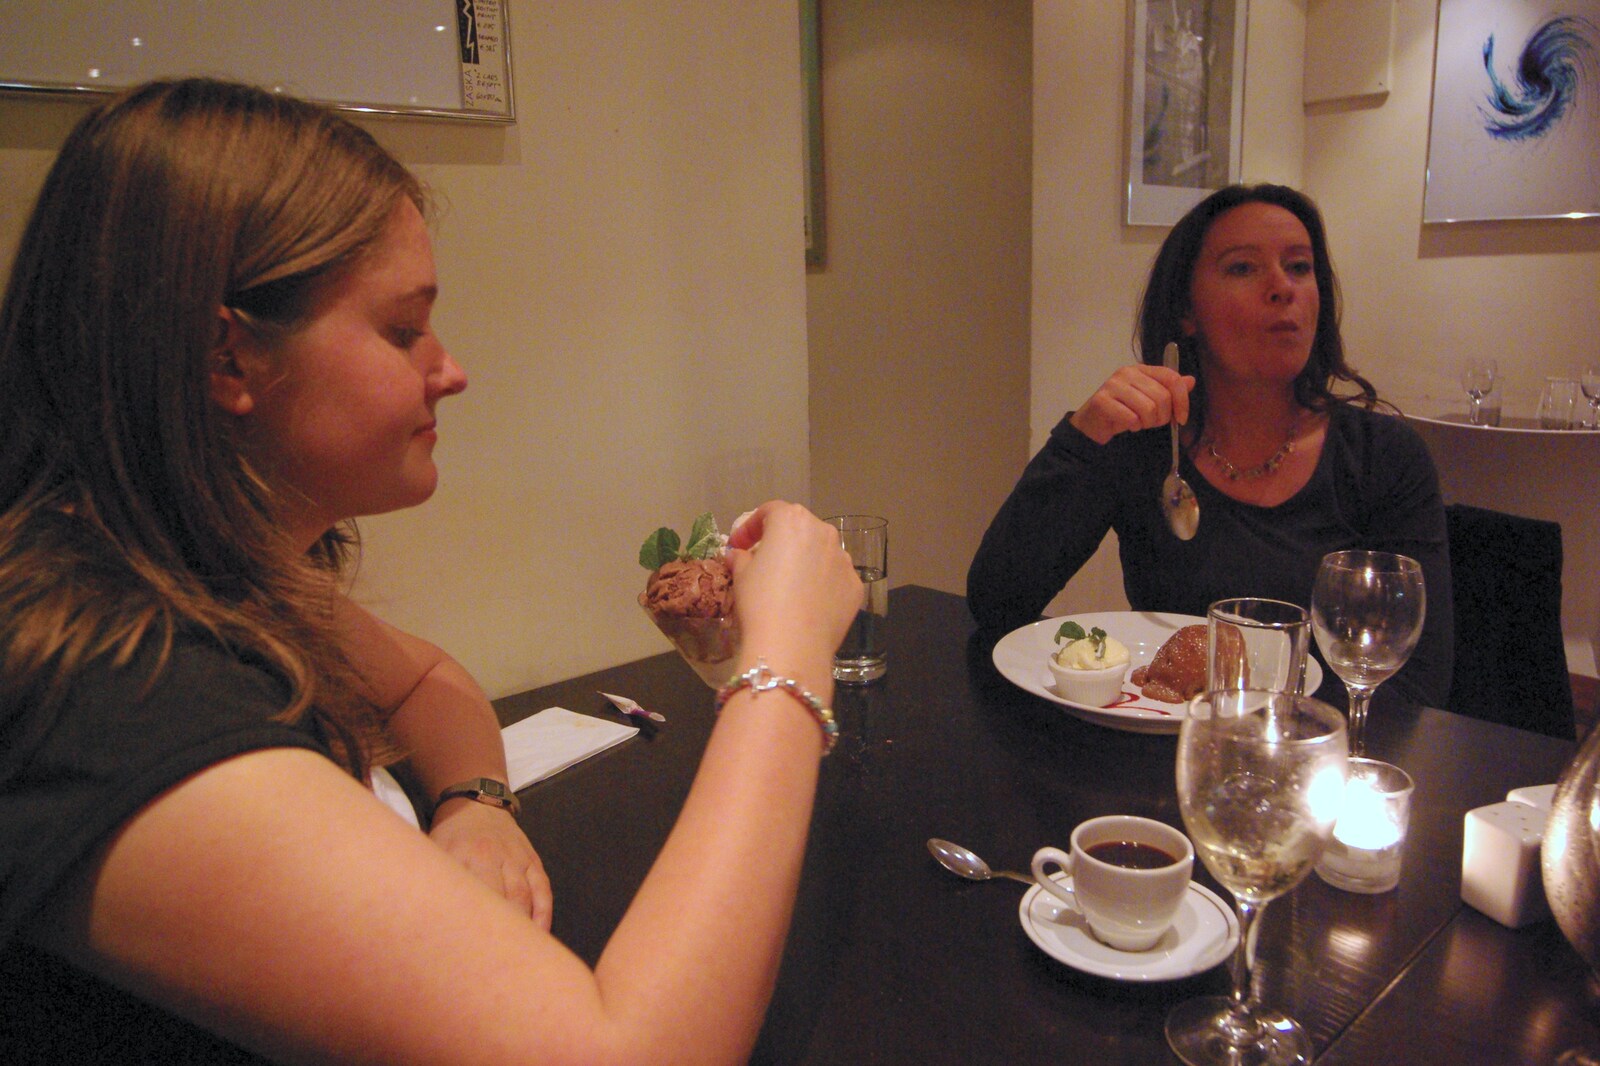 Isobel and Evelyn in Tonic from Apple Pressing, and Isobel's 30th in Blackrock, Dublin, Ireland - 2nd November 2007